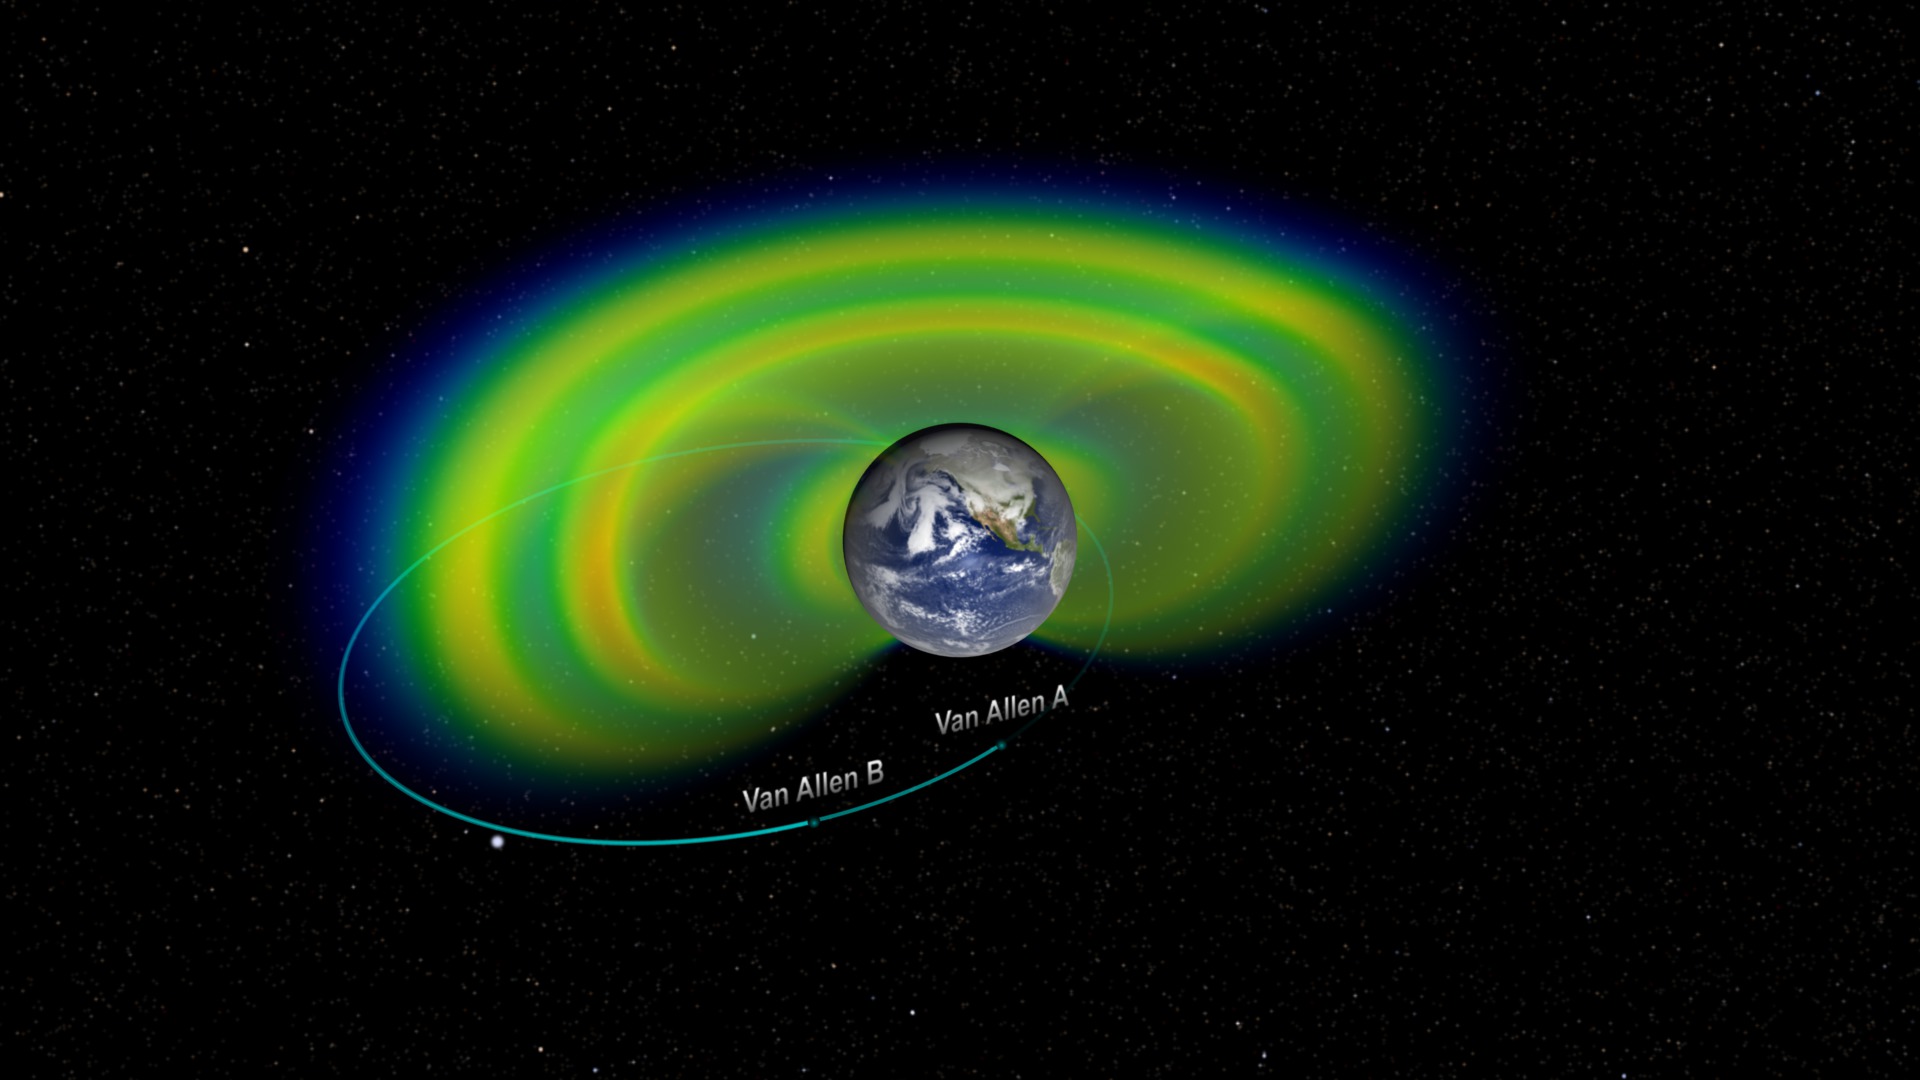 Preview Image for Van Allen Probes New View of the Radiation Belts